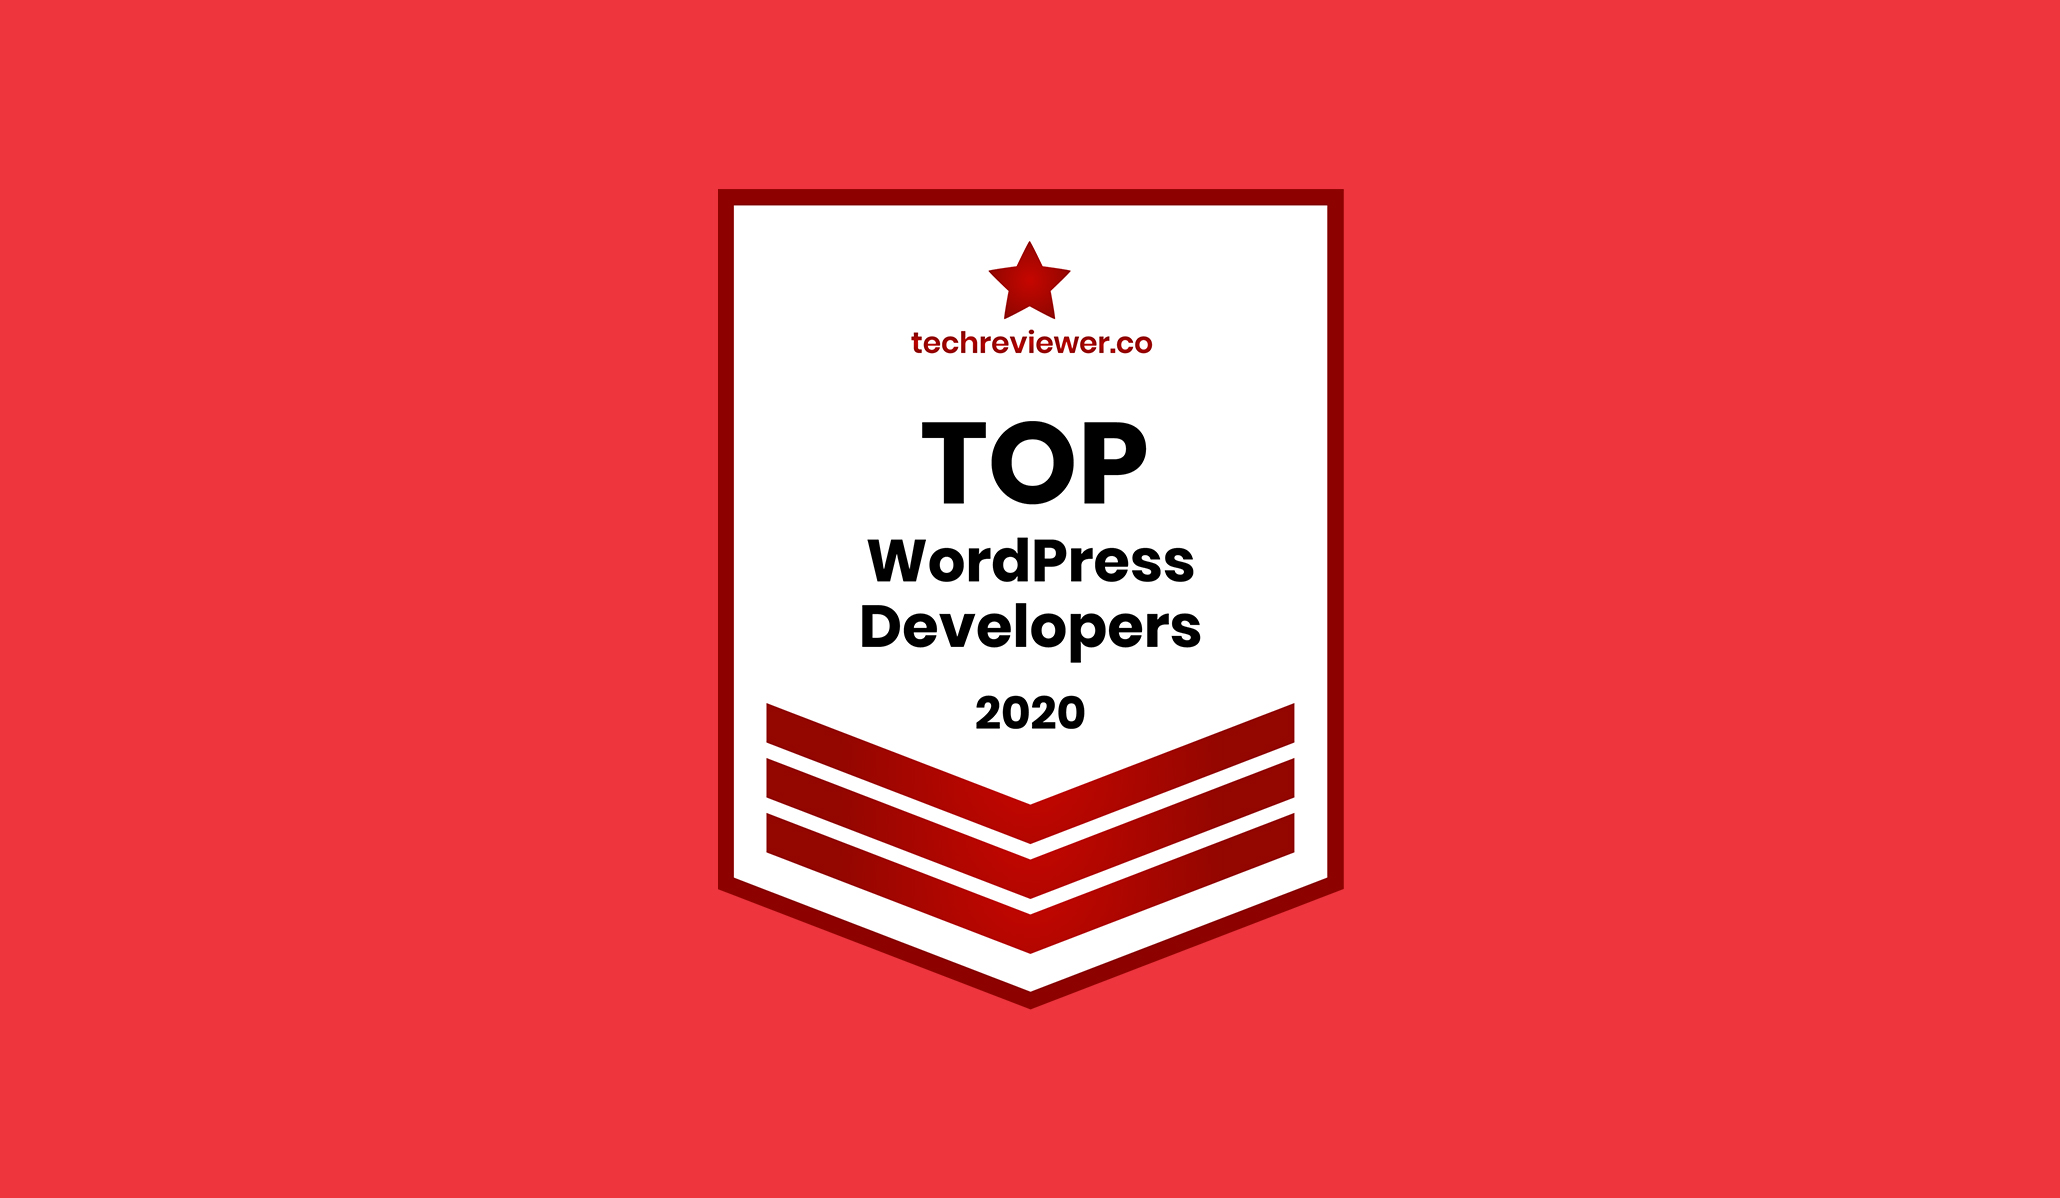 Multidots is recognized by Techreviewer as a Top WordPress Development Agency in 2020